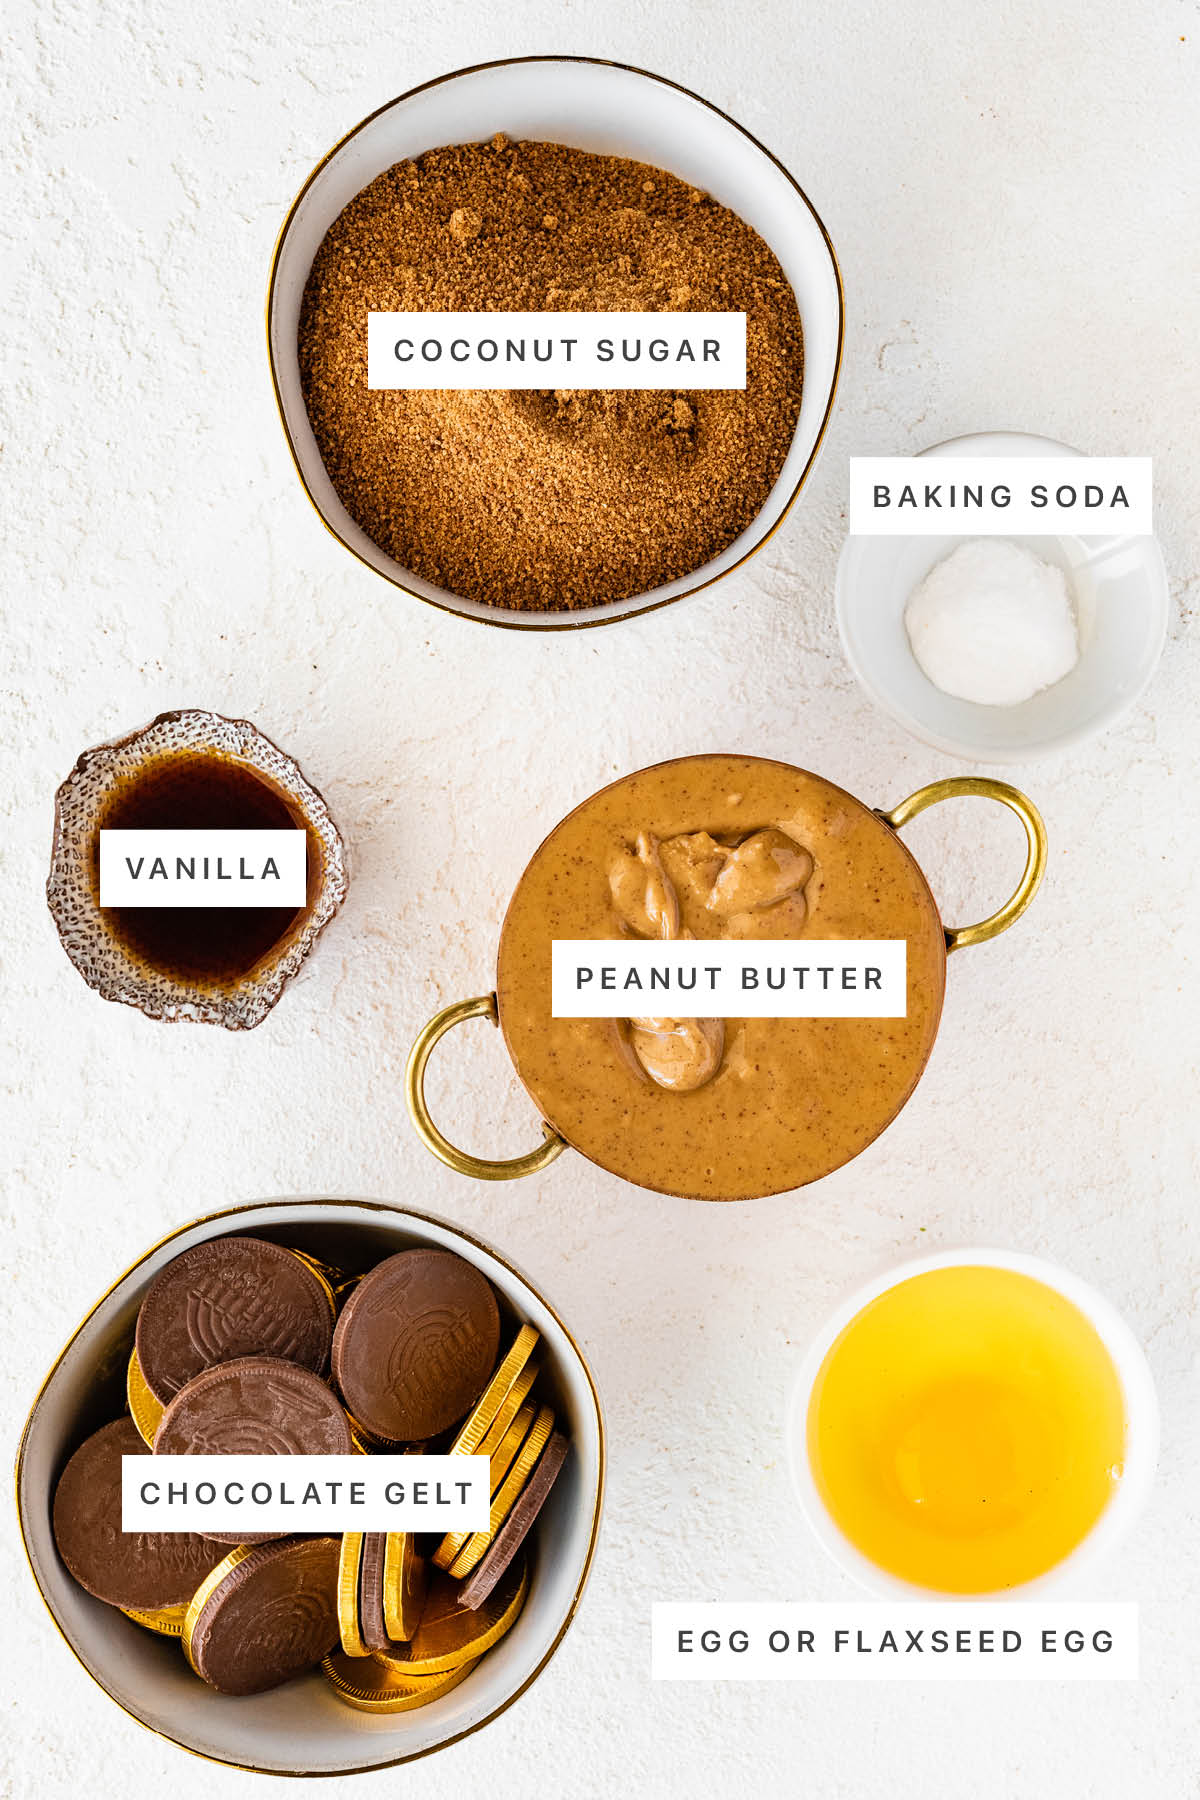 Ingredients measured out to make Hanukkah Gelt Peanut Butter Blossoms: coconut sugar, baking soda, vanilla, peanut butter, chocolate gelt and an egg.